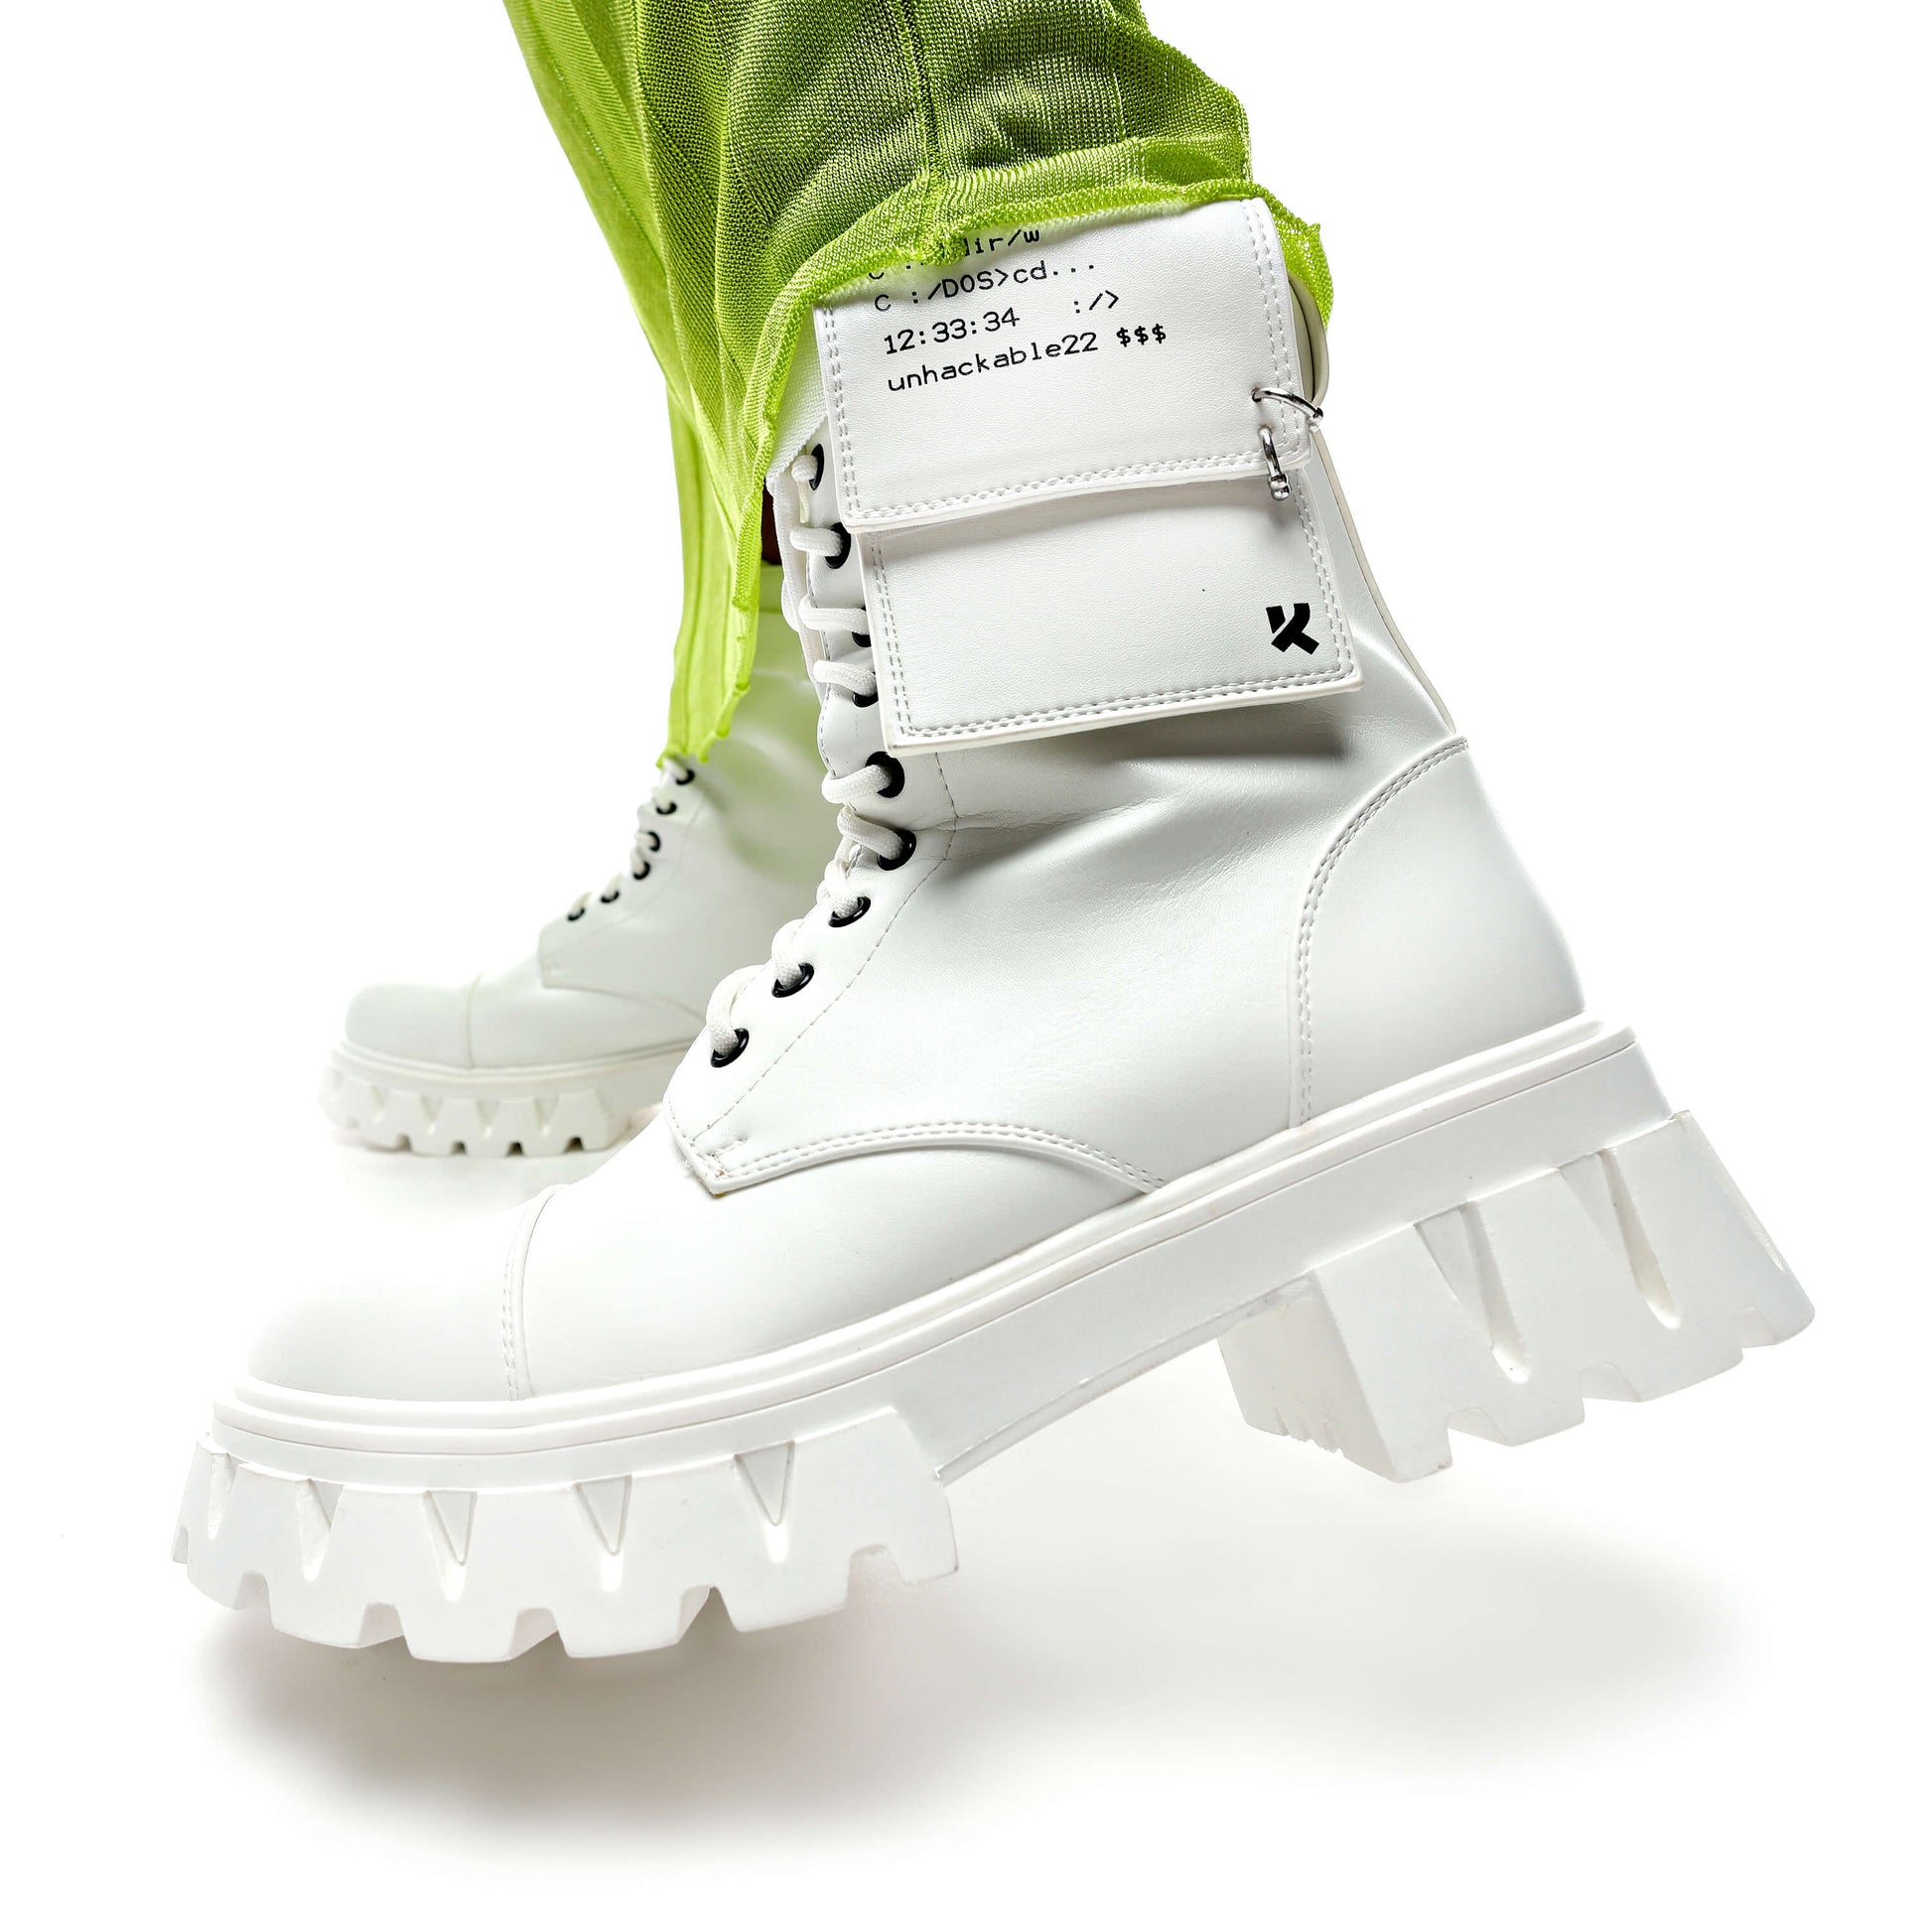 Banshee White Boots - Ankle Boots - KOI Footwear - White - Model Side View